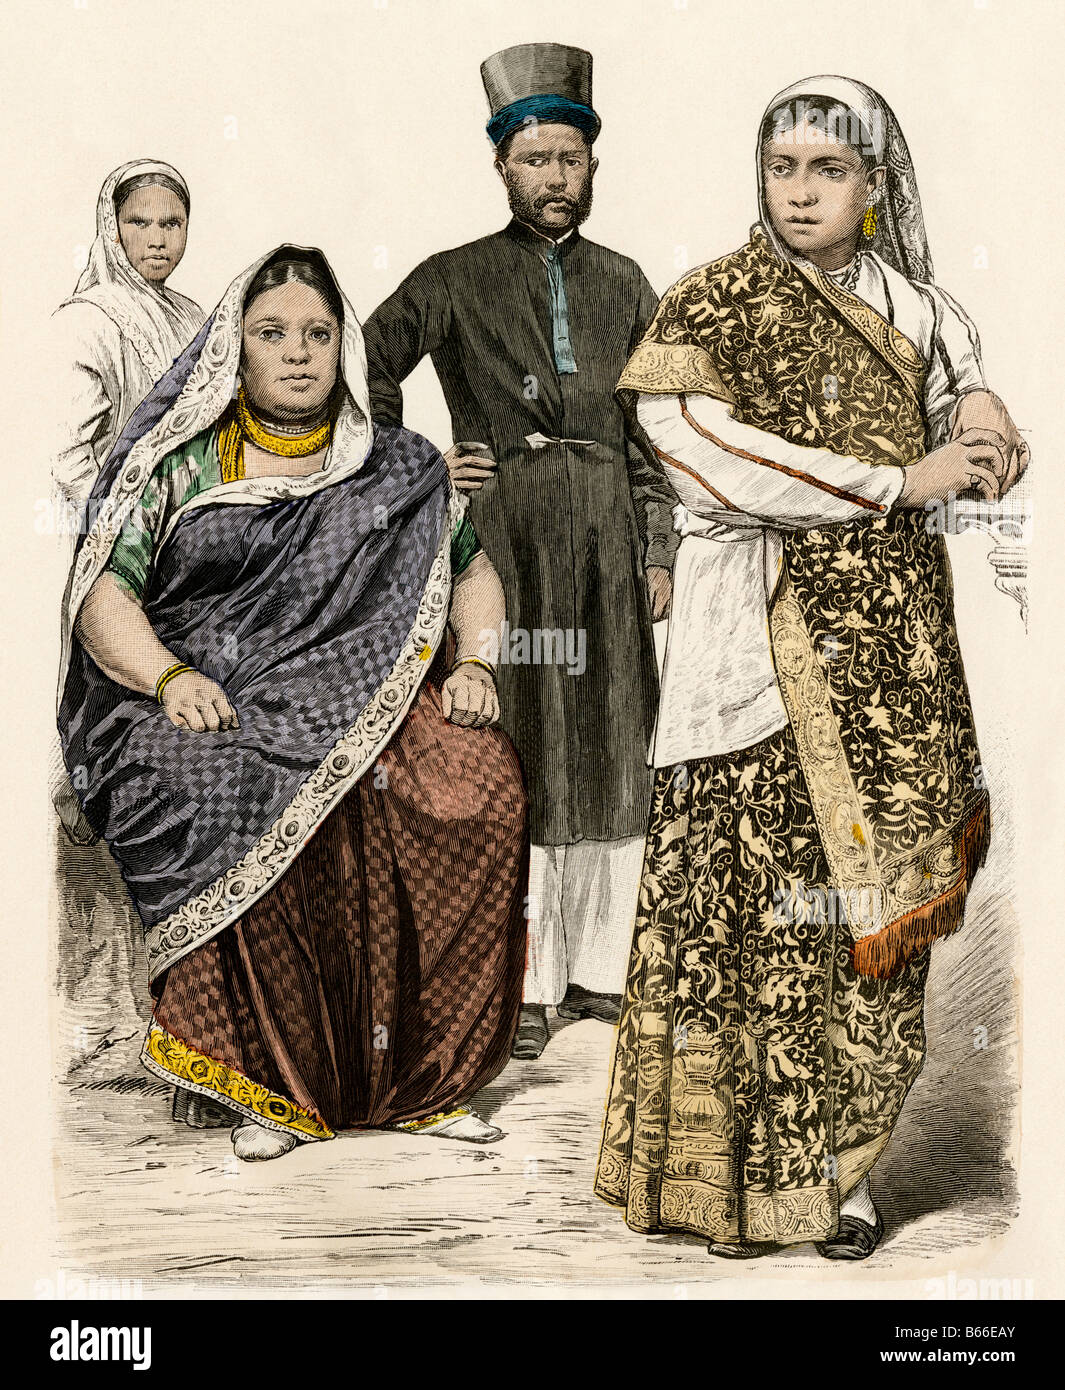 Parsi woman of Bombay and a man and woman from eastern India or Singapore in native dress 1800s. Hand-colored print Stock Photo